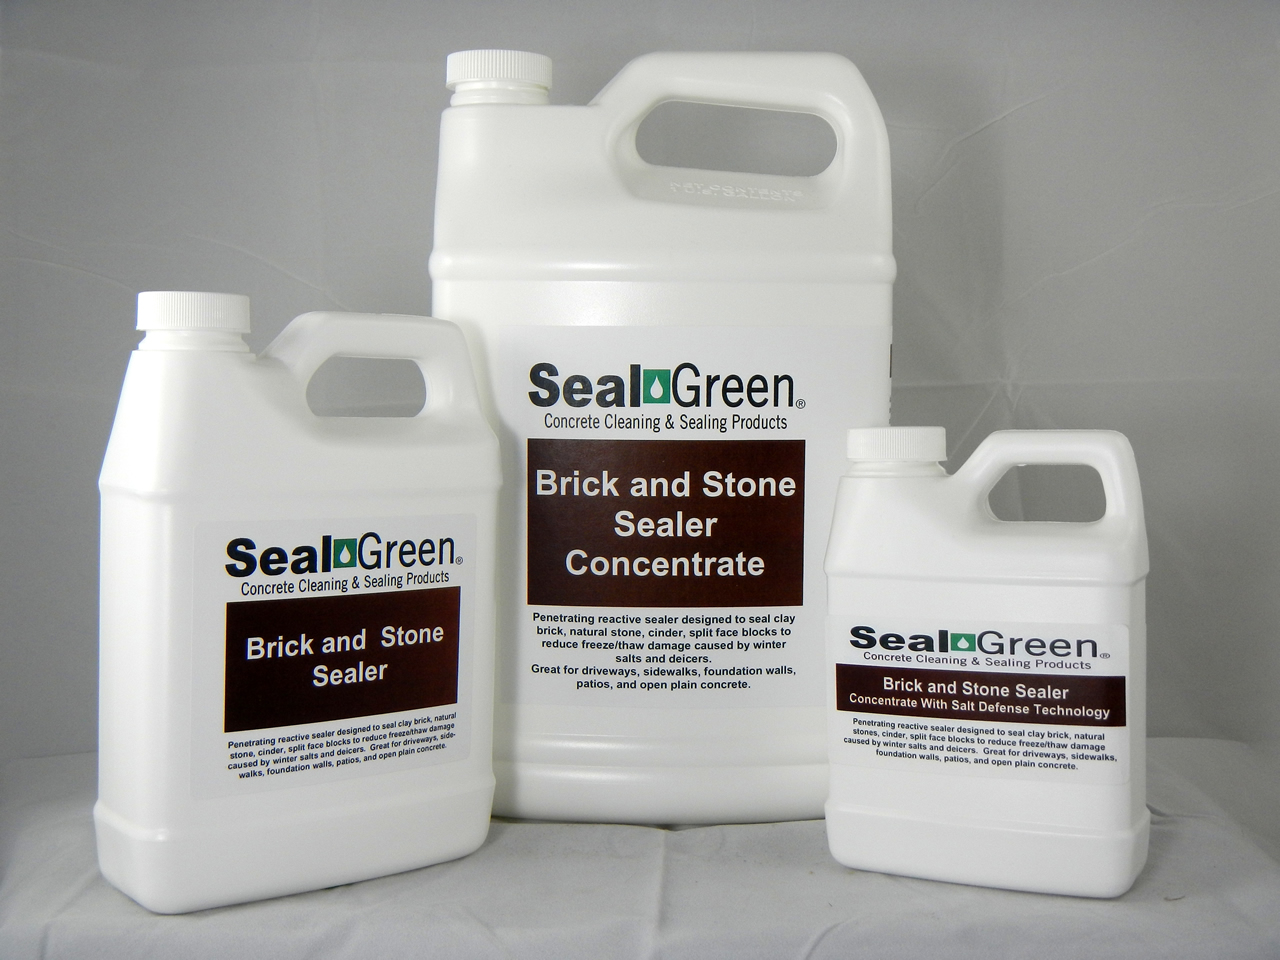 “Would you know if Seal Green has a product specifically for this tile?  We call it blue stone but I’m not sure if